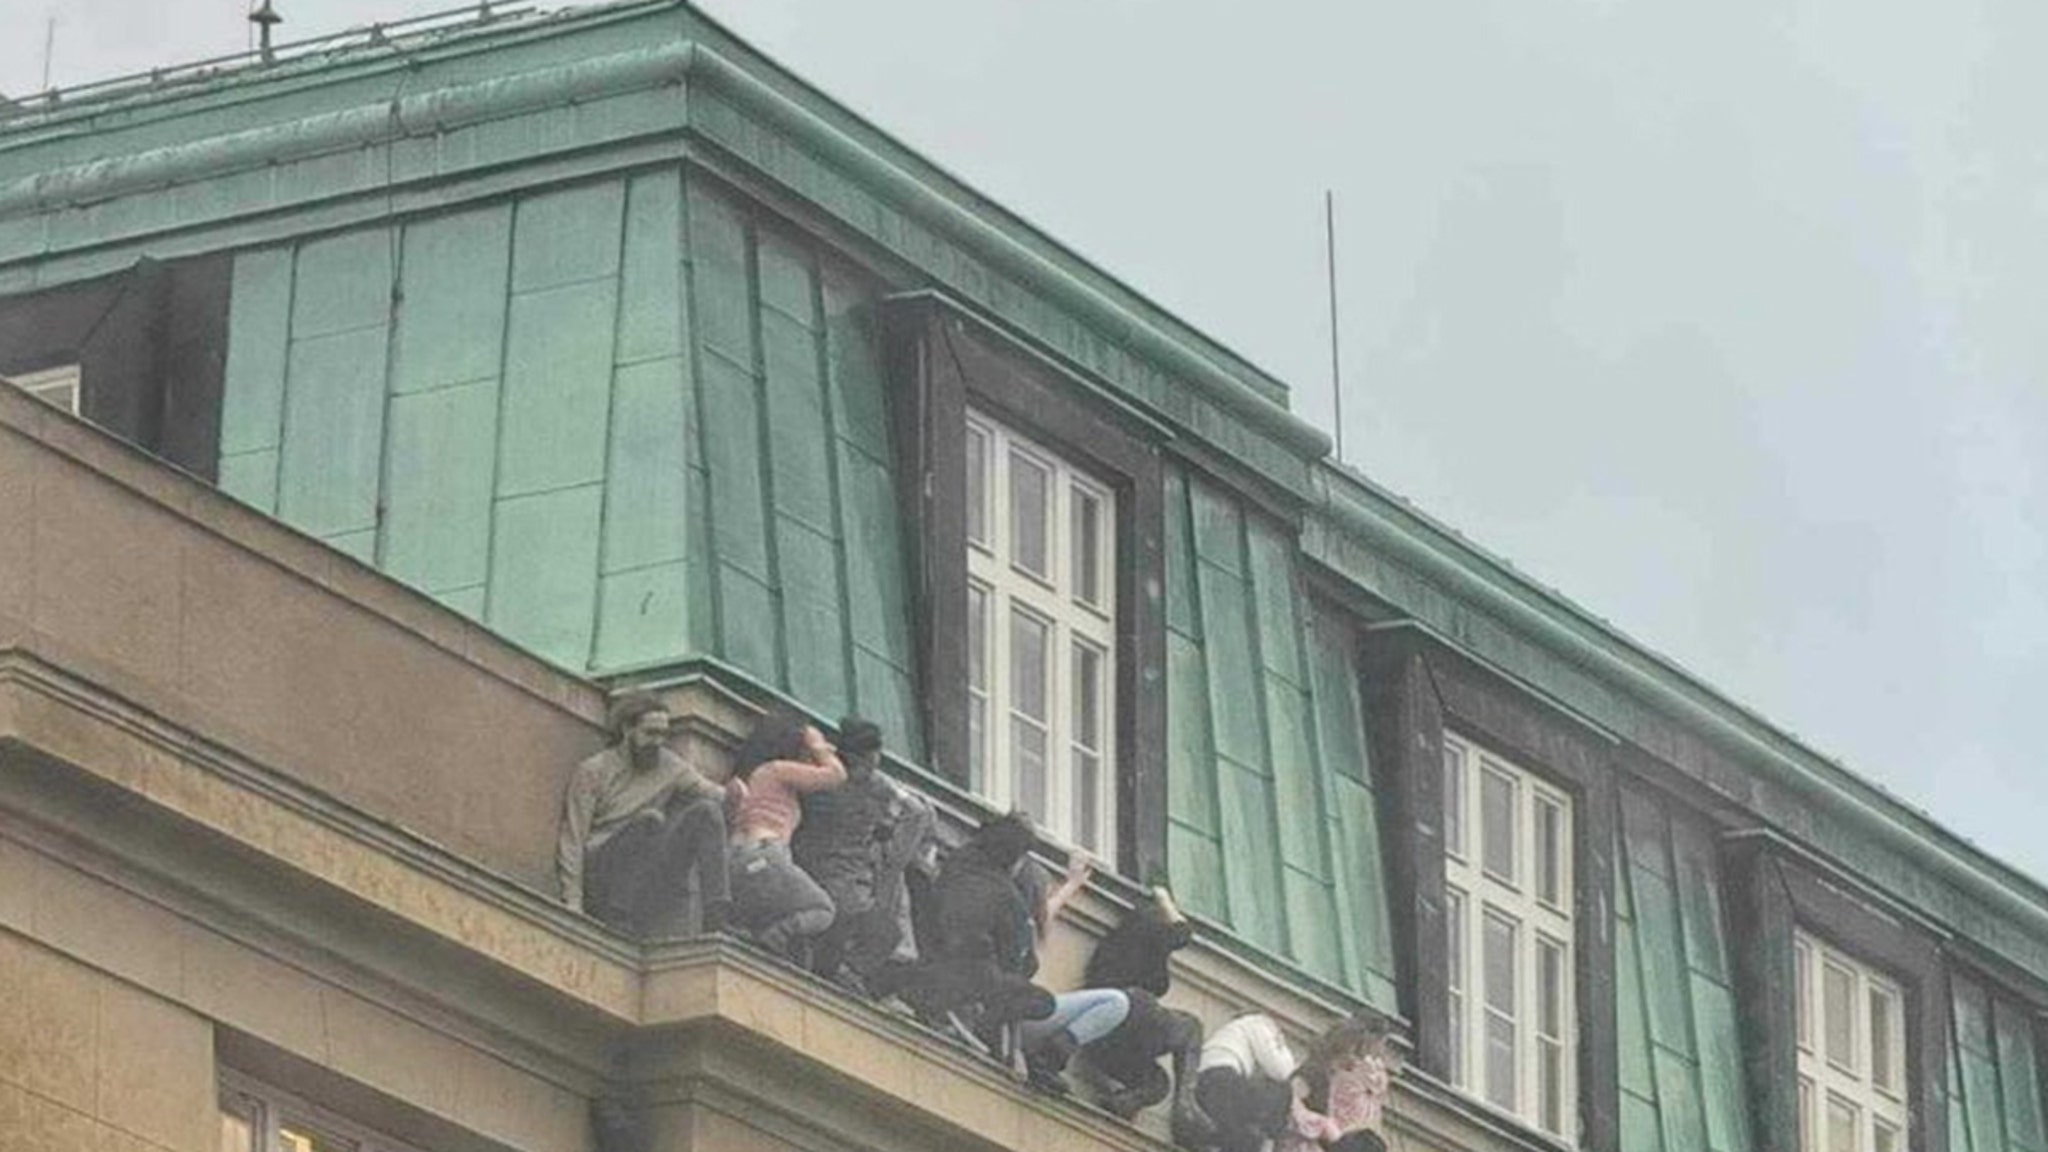 Students Hang Off Edge Of Building To Hide From Gunman in Prague Mass Shooting